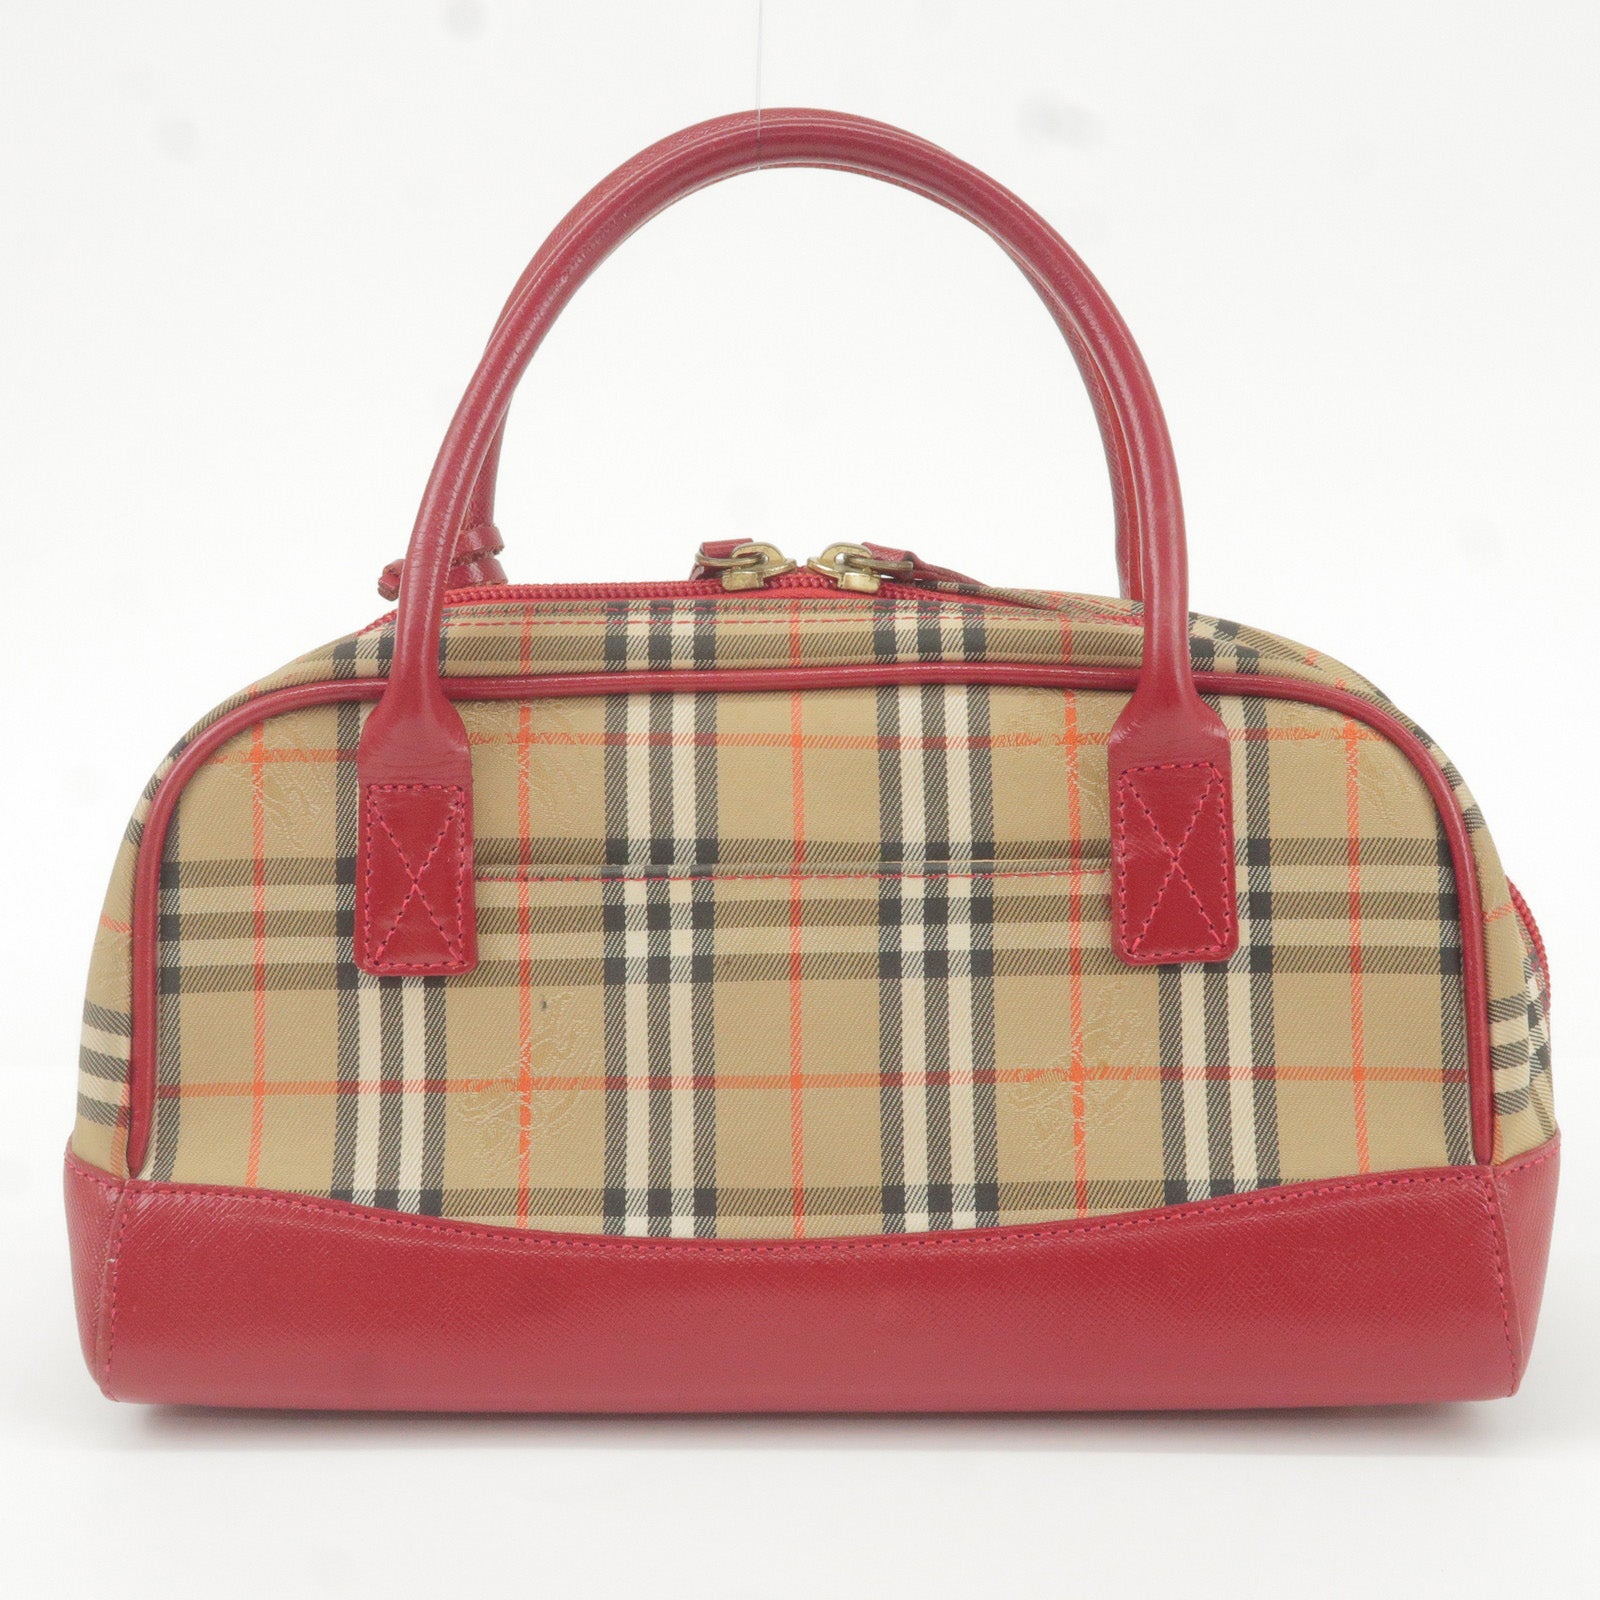 Vintage Burberry Handbag With Rolled Red Leather Handle #183474 | Black  Rock Galleries